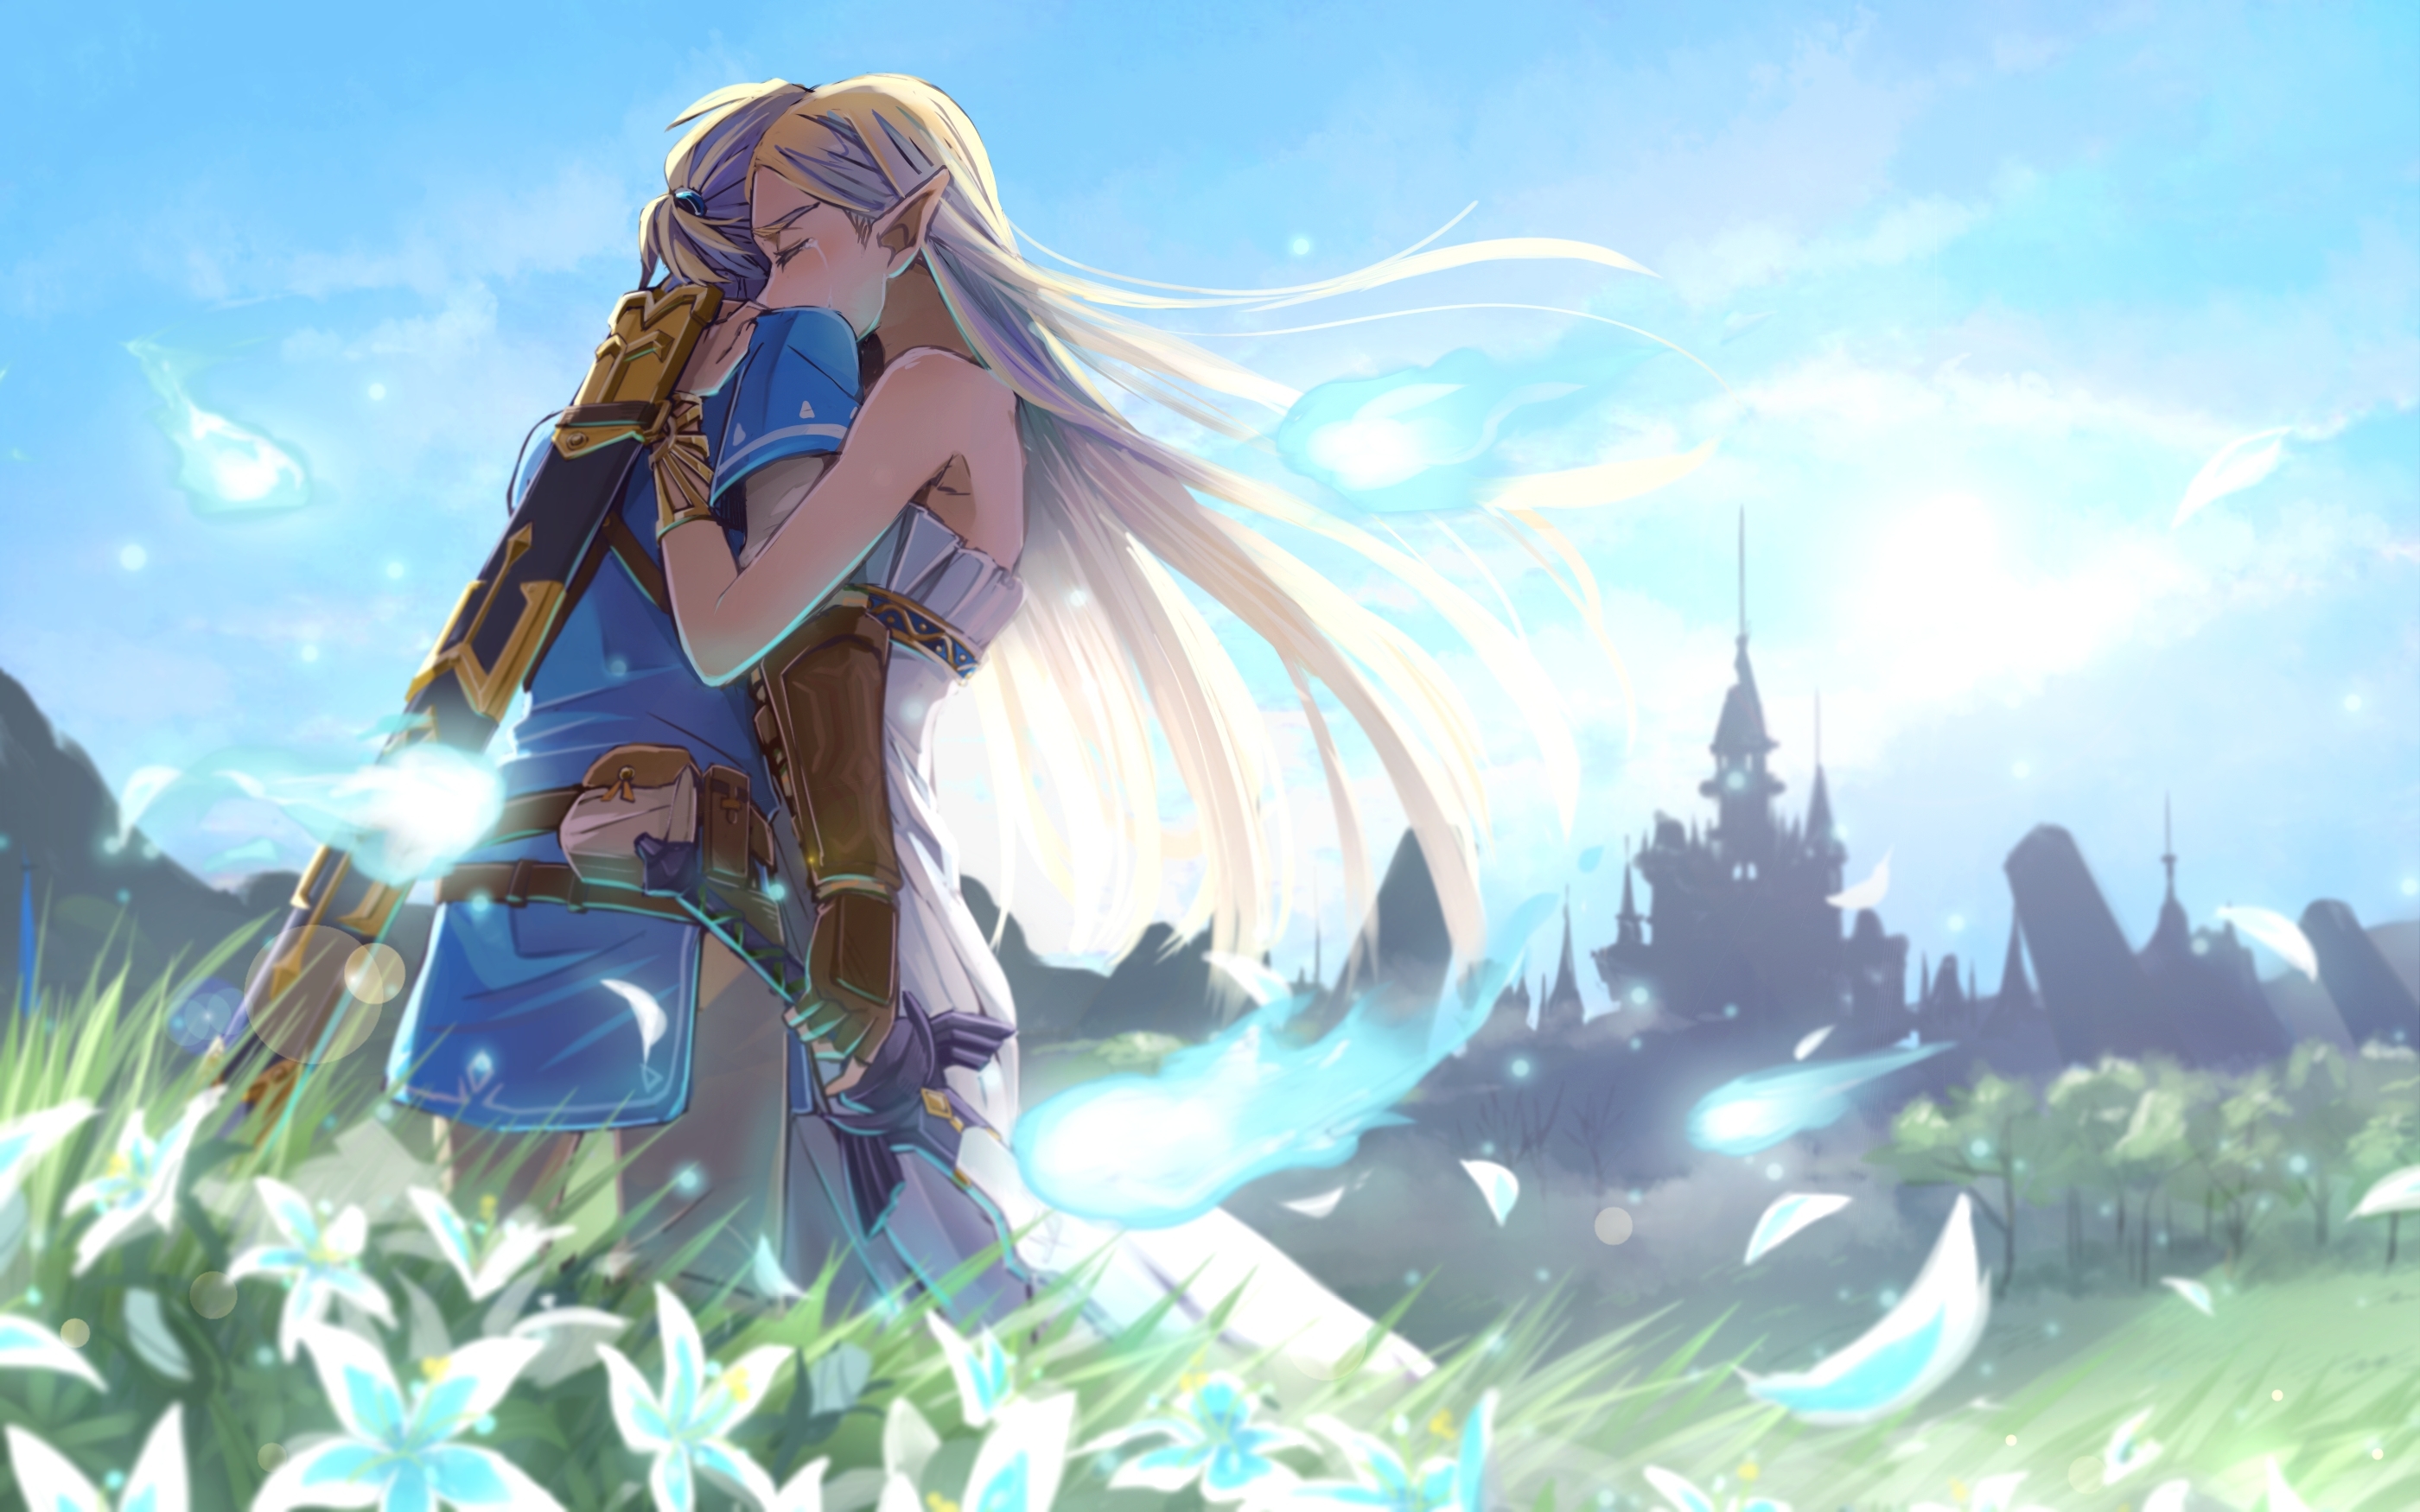 10 New Breath Of The Wild Zelda Wallpaper FULL HD 1920×1080 For PC Background